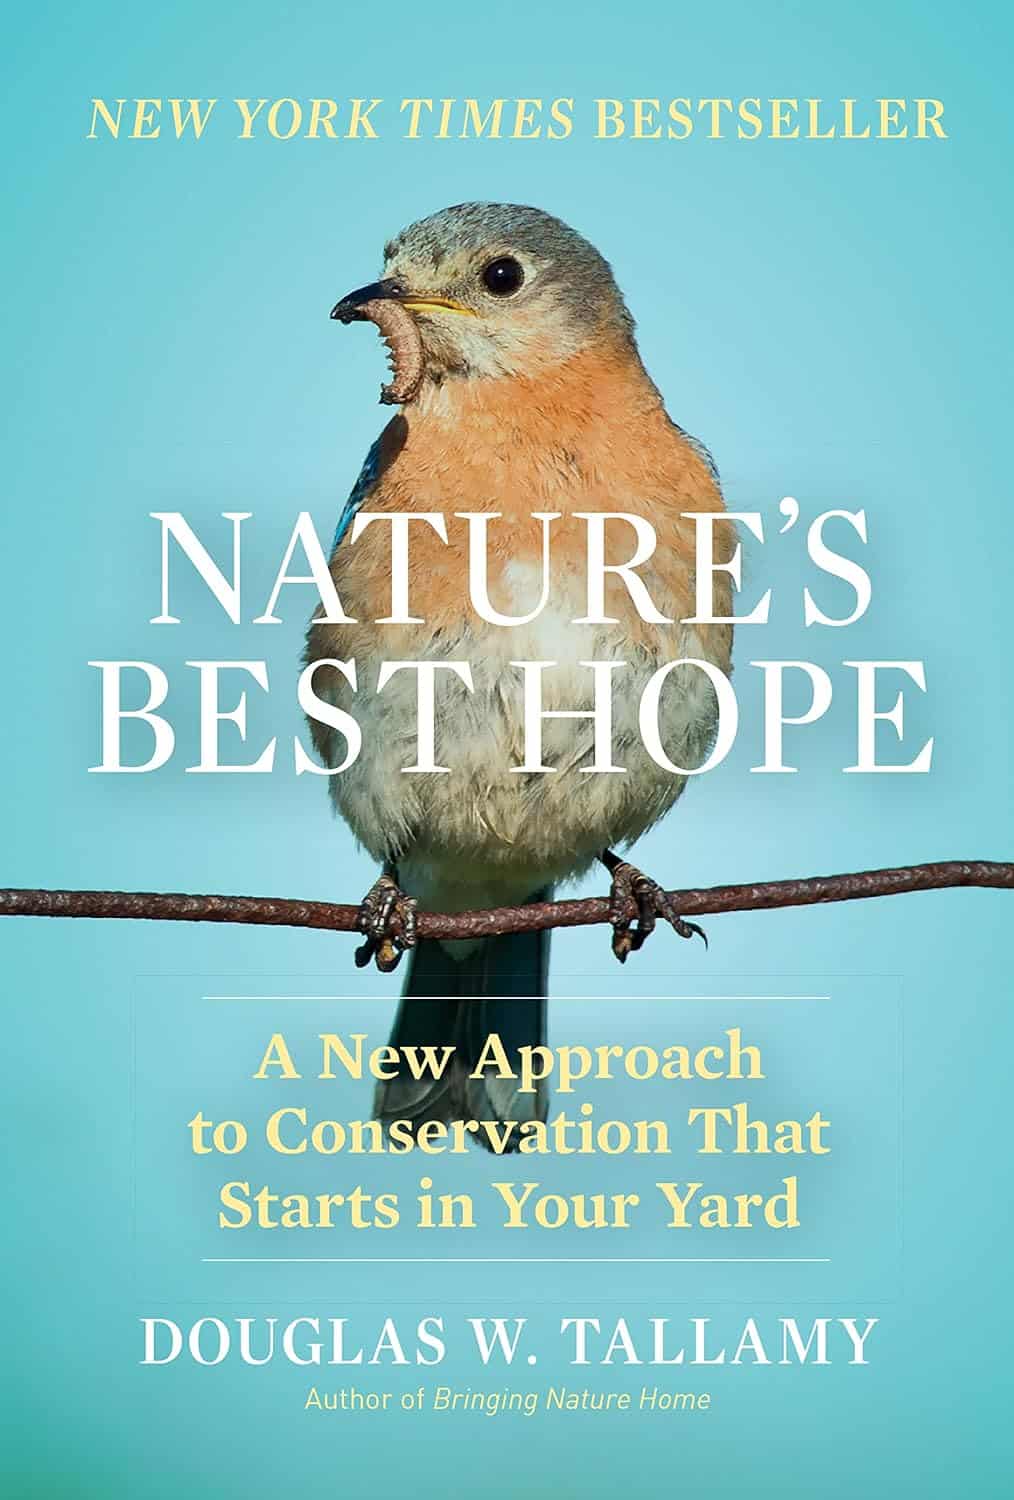 Nature's Best Hope: A New Approach to Conservation that Starts in Your Own Yard